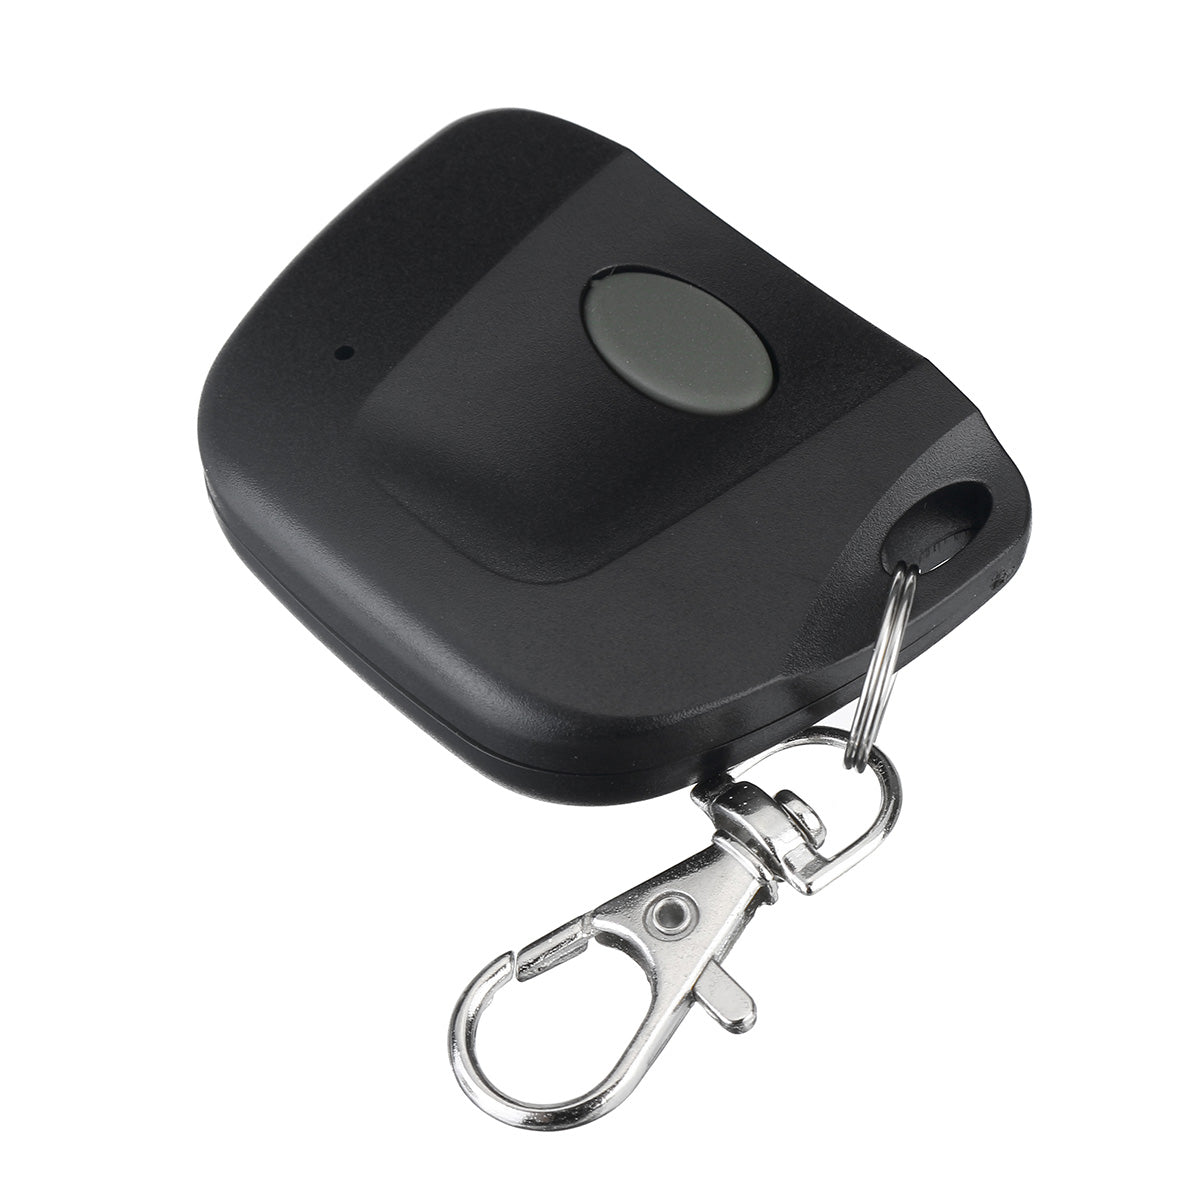 Key Chain Remote 1 Button Garage Door Opener - Compatible with Multicode 3089, 10 Dip Switch, 300Mhz